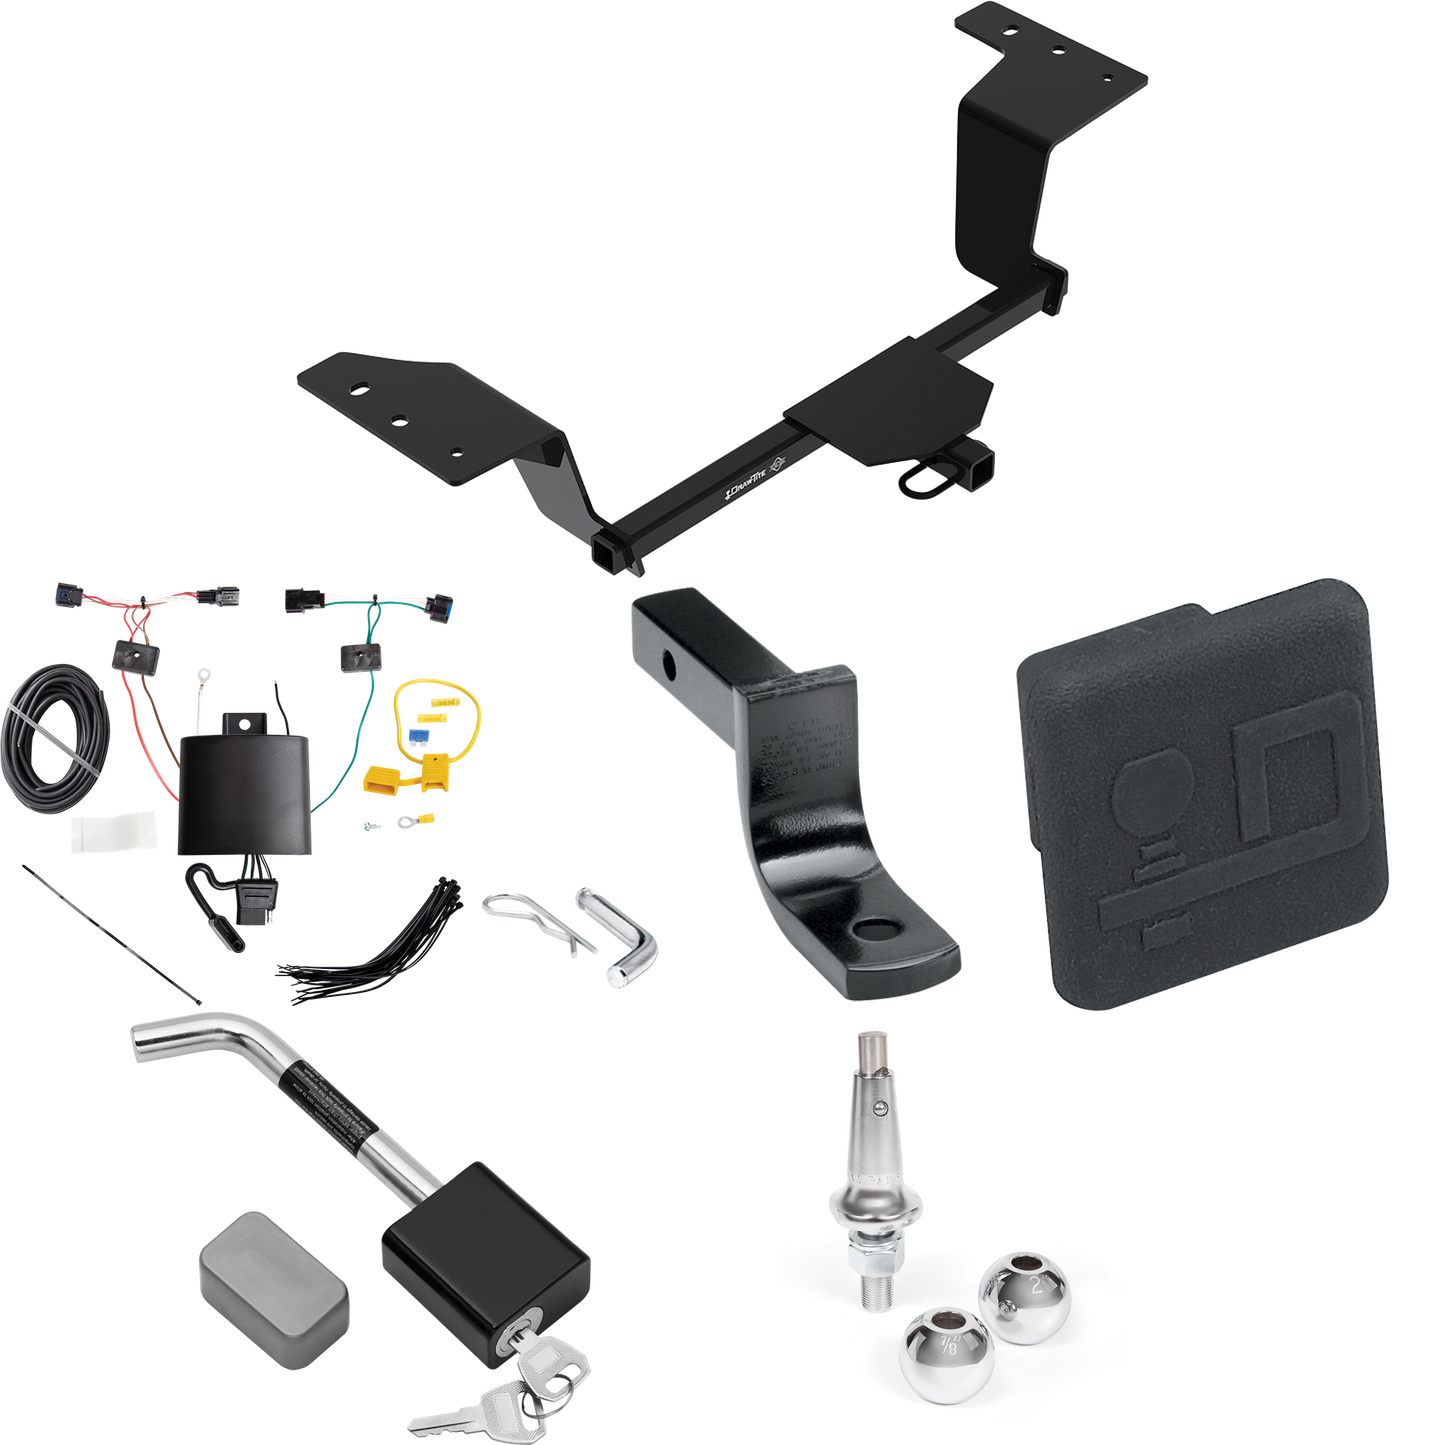 Fits 2019-2023 KIA Forte Trailer Hitch Tow PKG w/ 4-Flat Wiring Harness + Draw-Bar + Interchangeable 1-7/8" & 2" Balls + Hitch Cover + Hitch Lock (For Sedan Models) By Draw-Tite